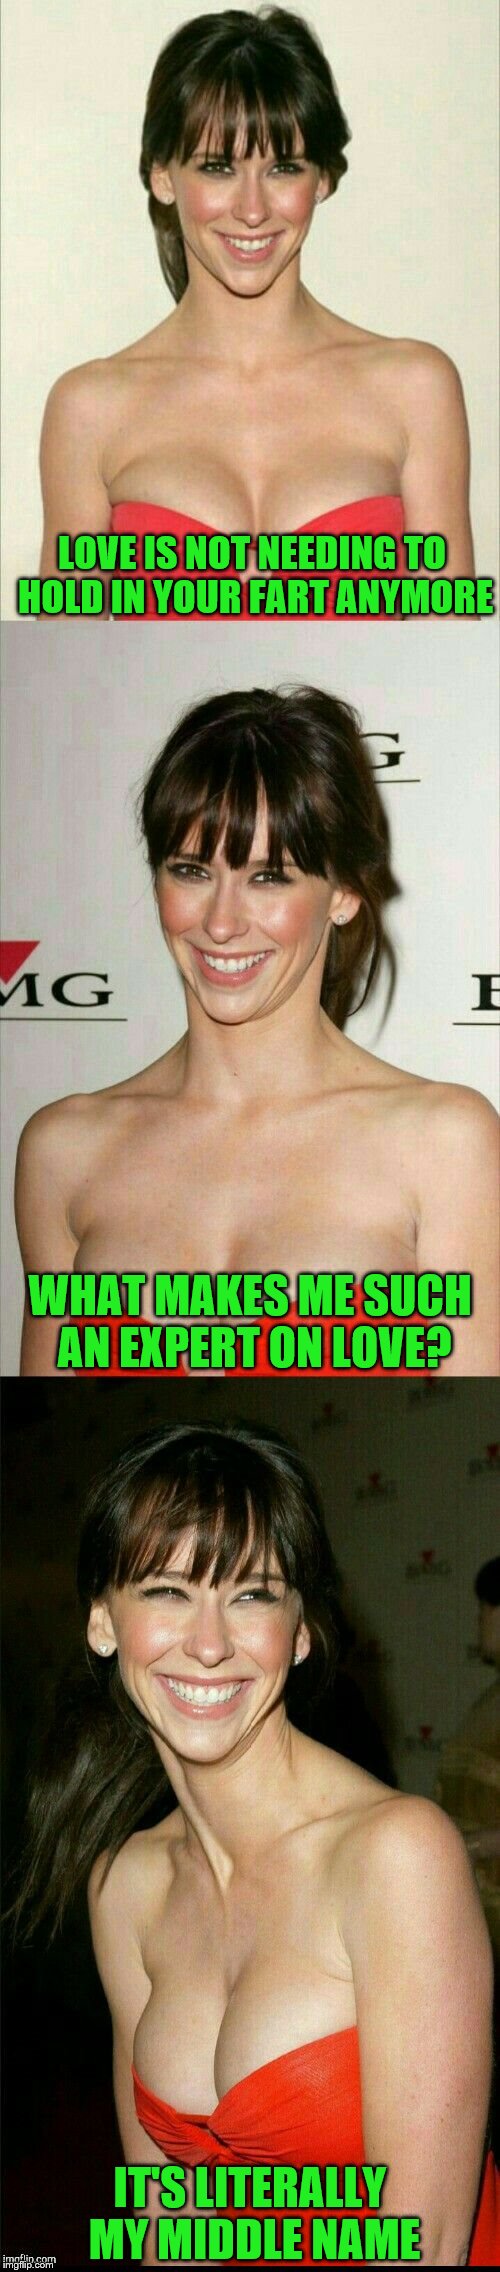 Sounds like she's the expert (A JBmemegeek request... obviously) | LOVE IS NOT NEEDING TO HOLD IN YOUR FART ANYMORE; WHAT MAKES ME SUCH AN EXPERT ON LOVE? IT'S LITERALLY MY MIDDLE NAME | image tagged in jennifer love hewitt joke template,memes,jbmemegeek,personal challenge,love,farts | made w/ Imgflip meme maker